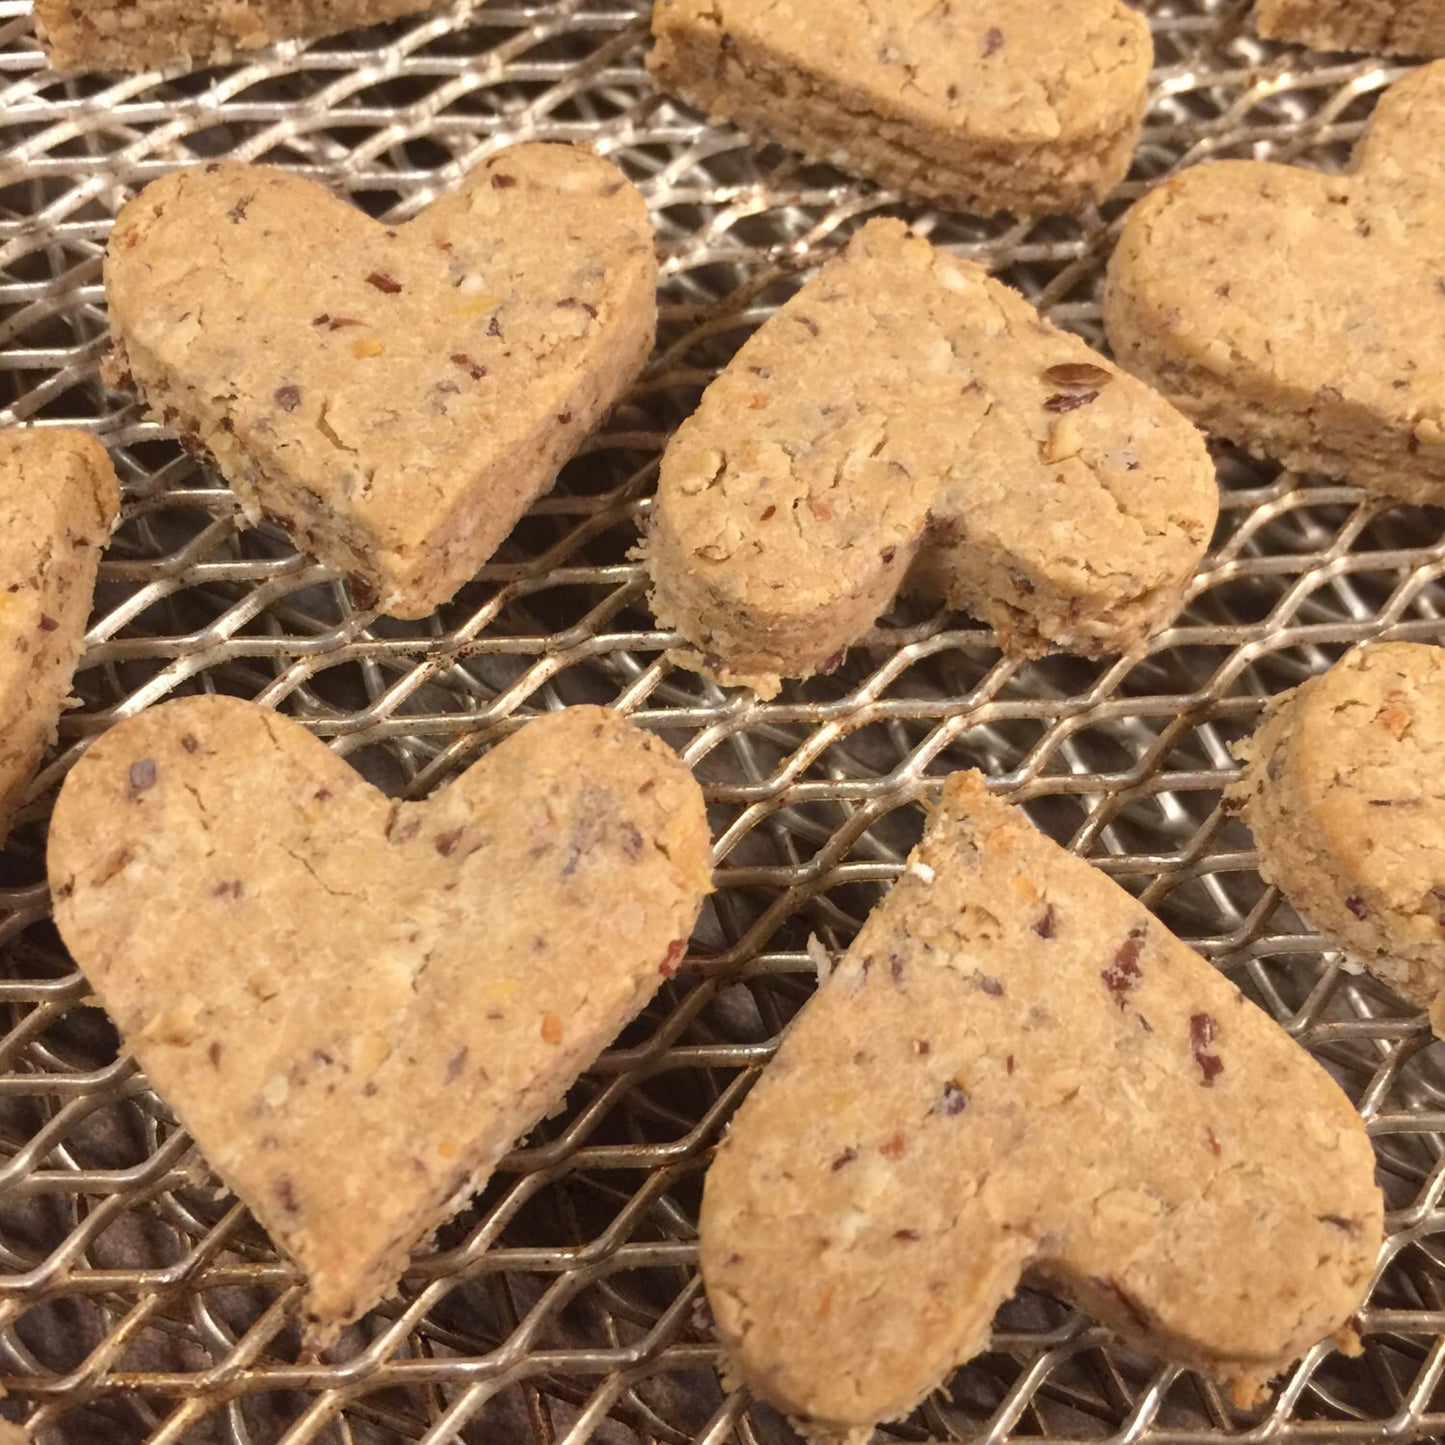 PEANUT BUTTER KISSES Dog Treats - Homemade Natural Organic Wheat Free - A Portion of Proceeds go to Pet Rescue